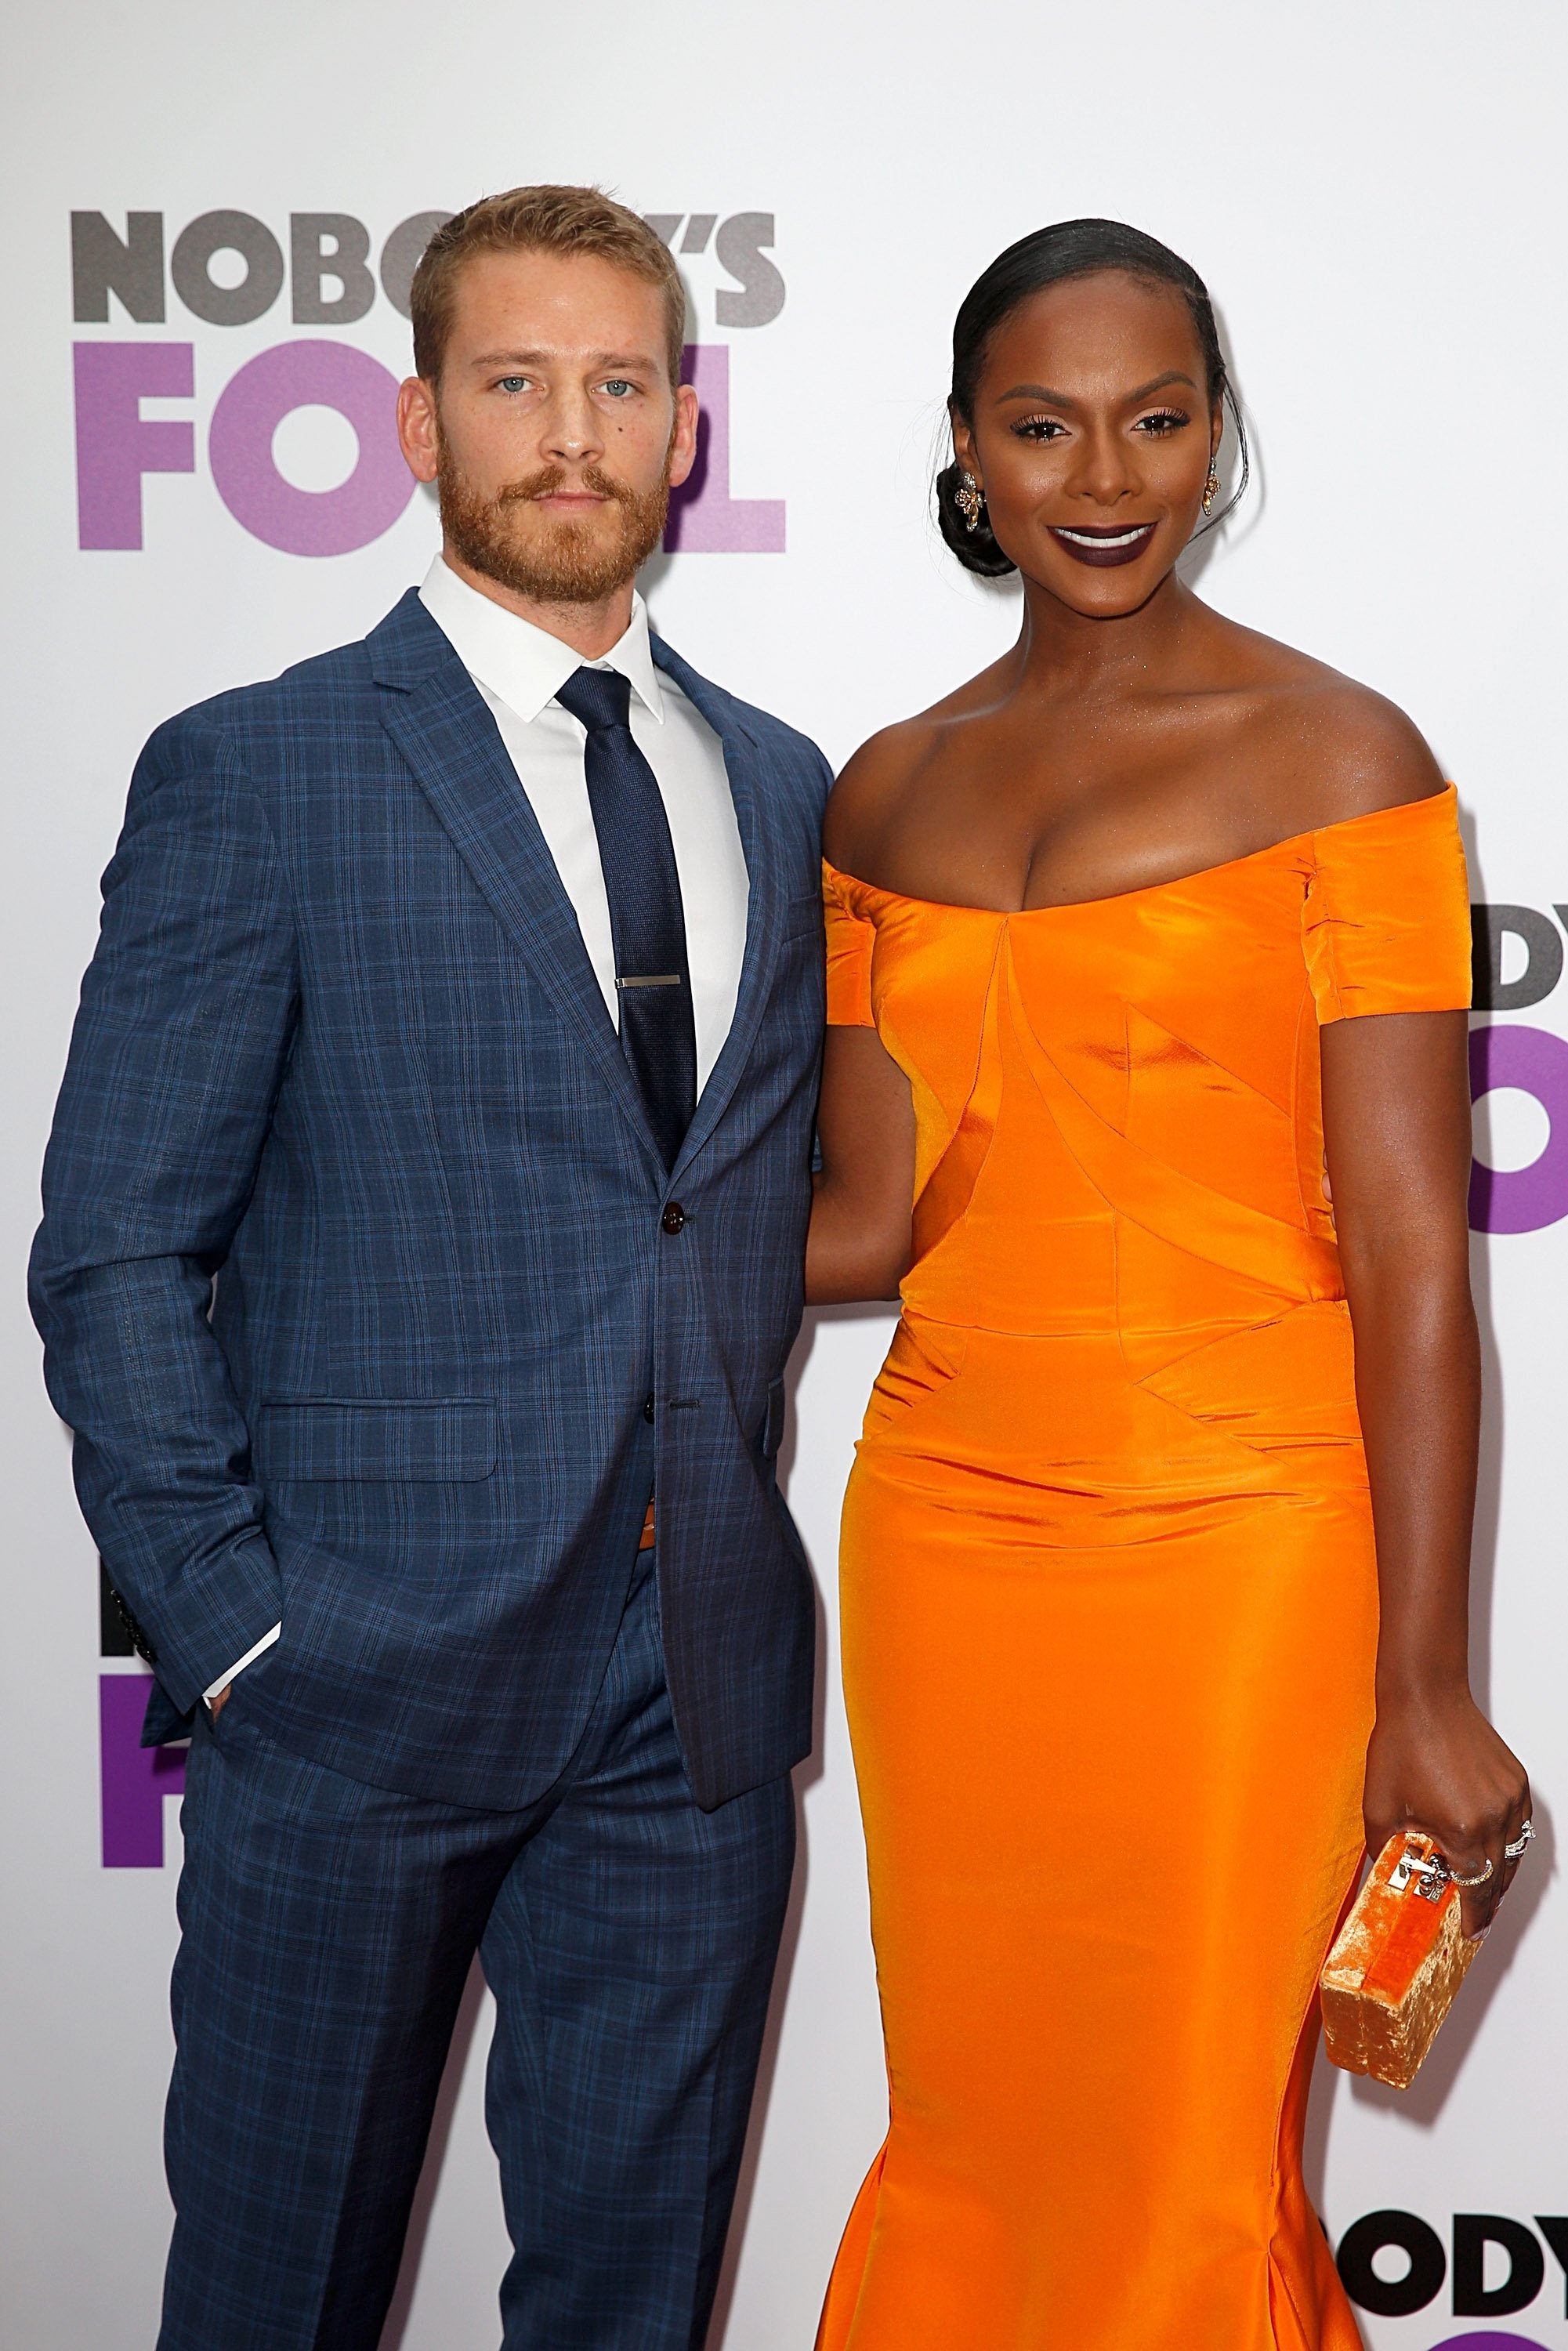 Nick James and Tika Sumpter are glammed up for the premiere of "Nobody's Fool" in New York on 29, October 2018. | Photo: Getty Images